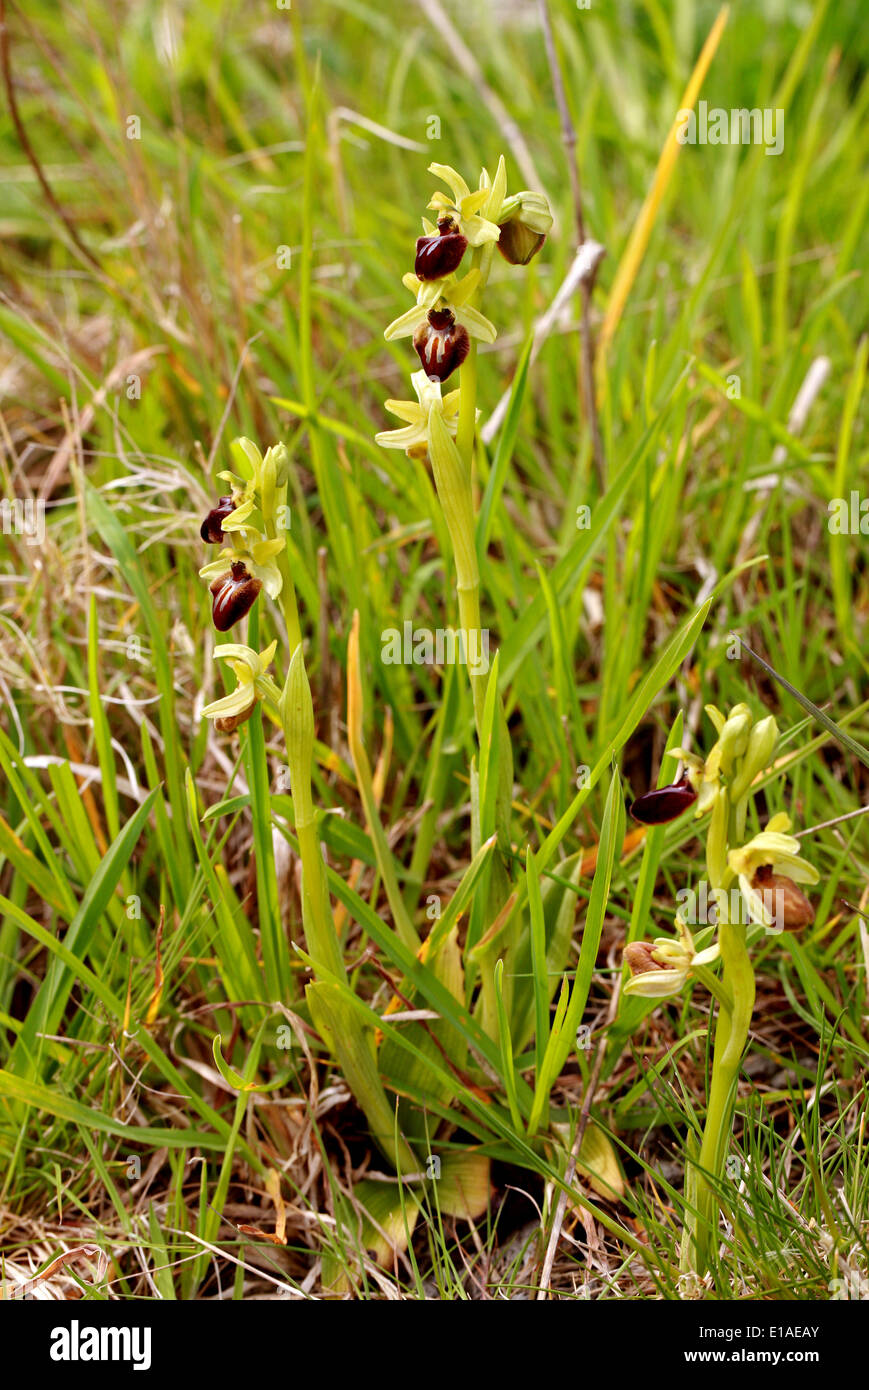 Early Spider Orchids, Ophrys sphegodes, Orchidaceae. Samphire Hoe, Kent. British Wild Flower, Regno Unito. Foto Stock